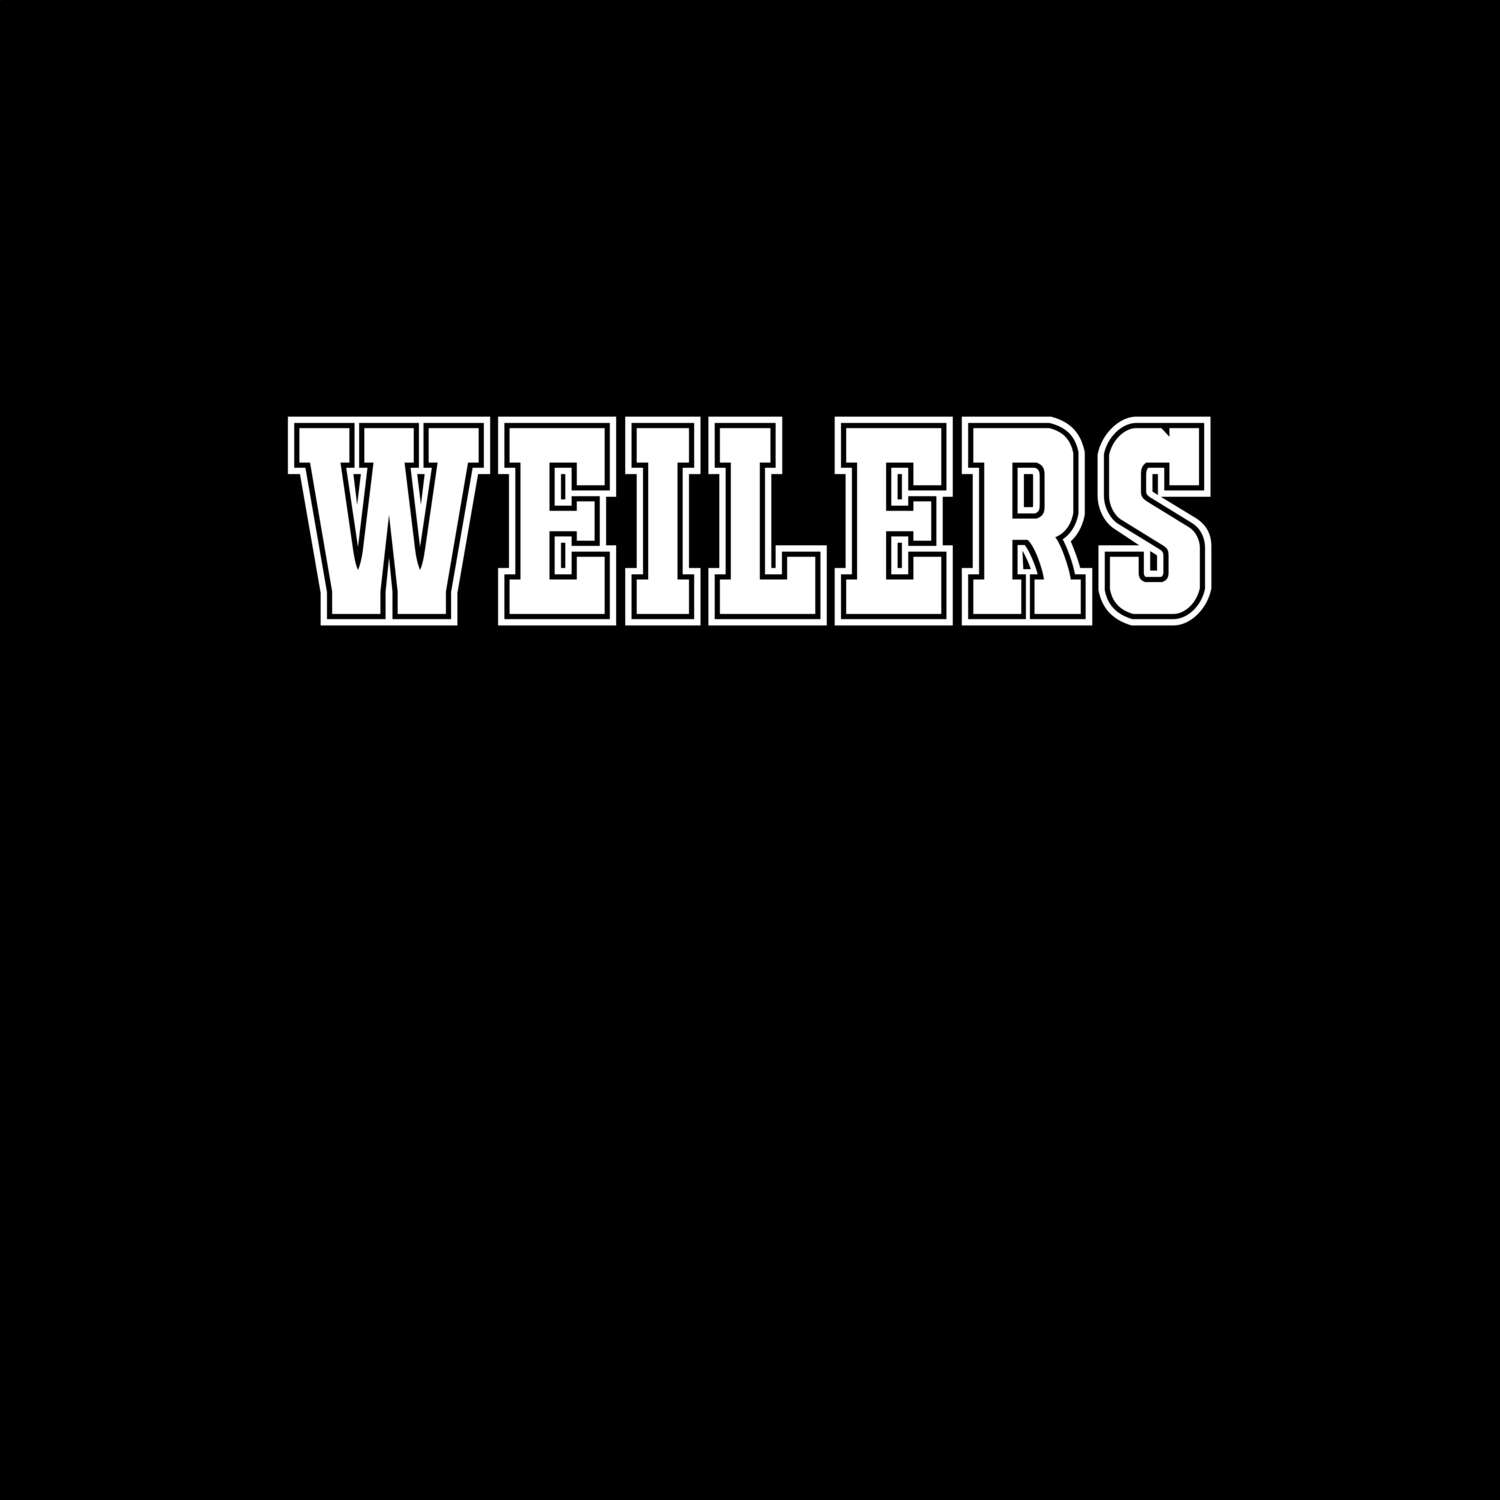 Weilers T-Shirt »Classic«